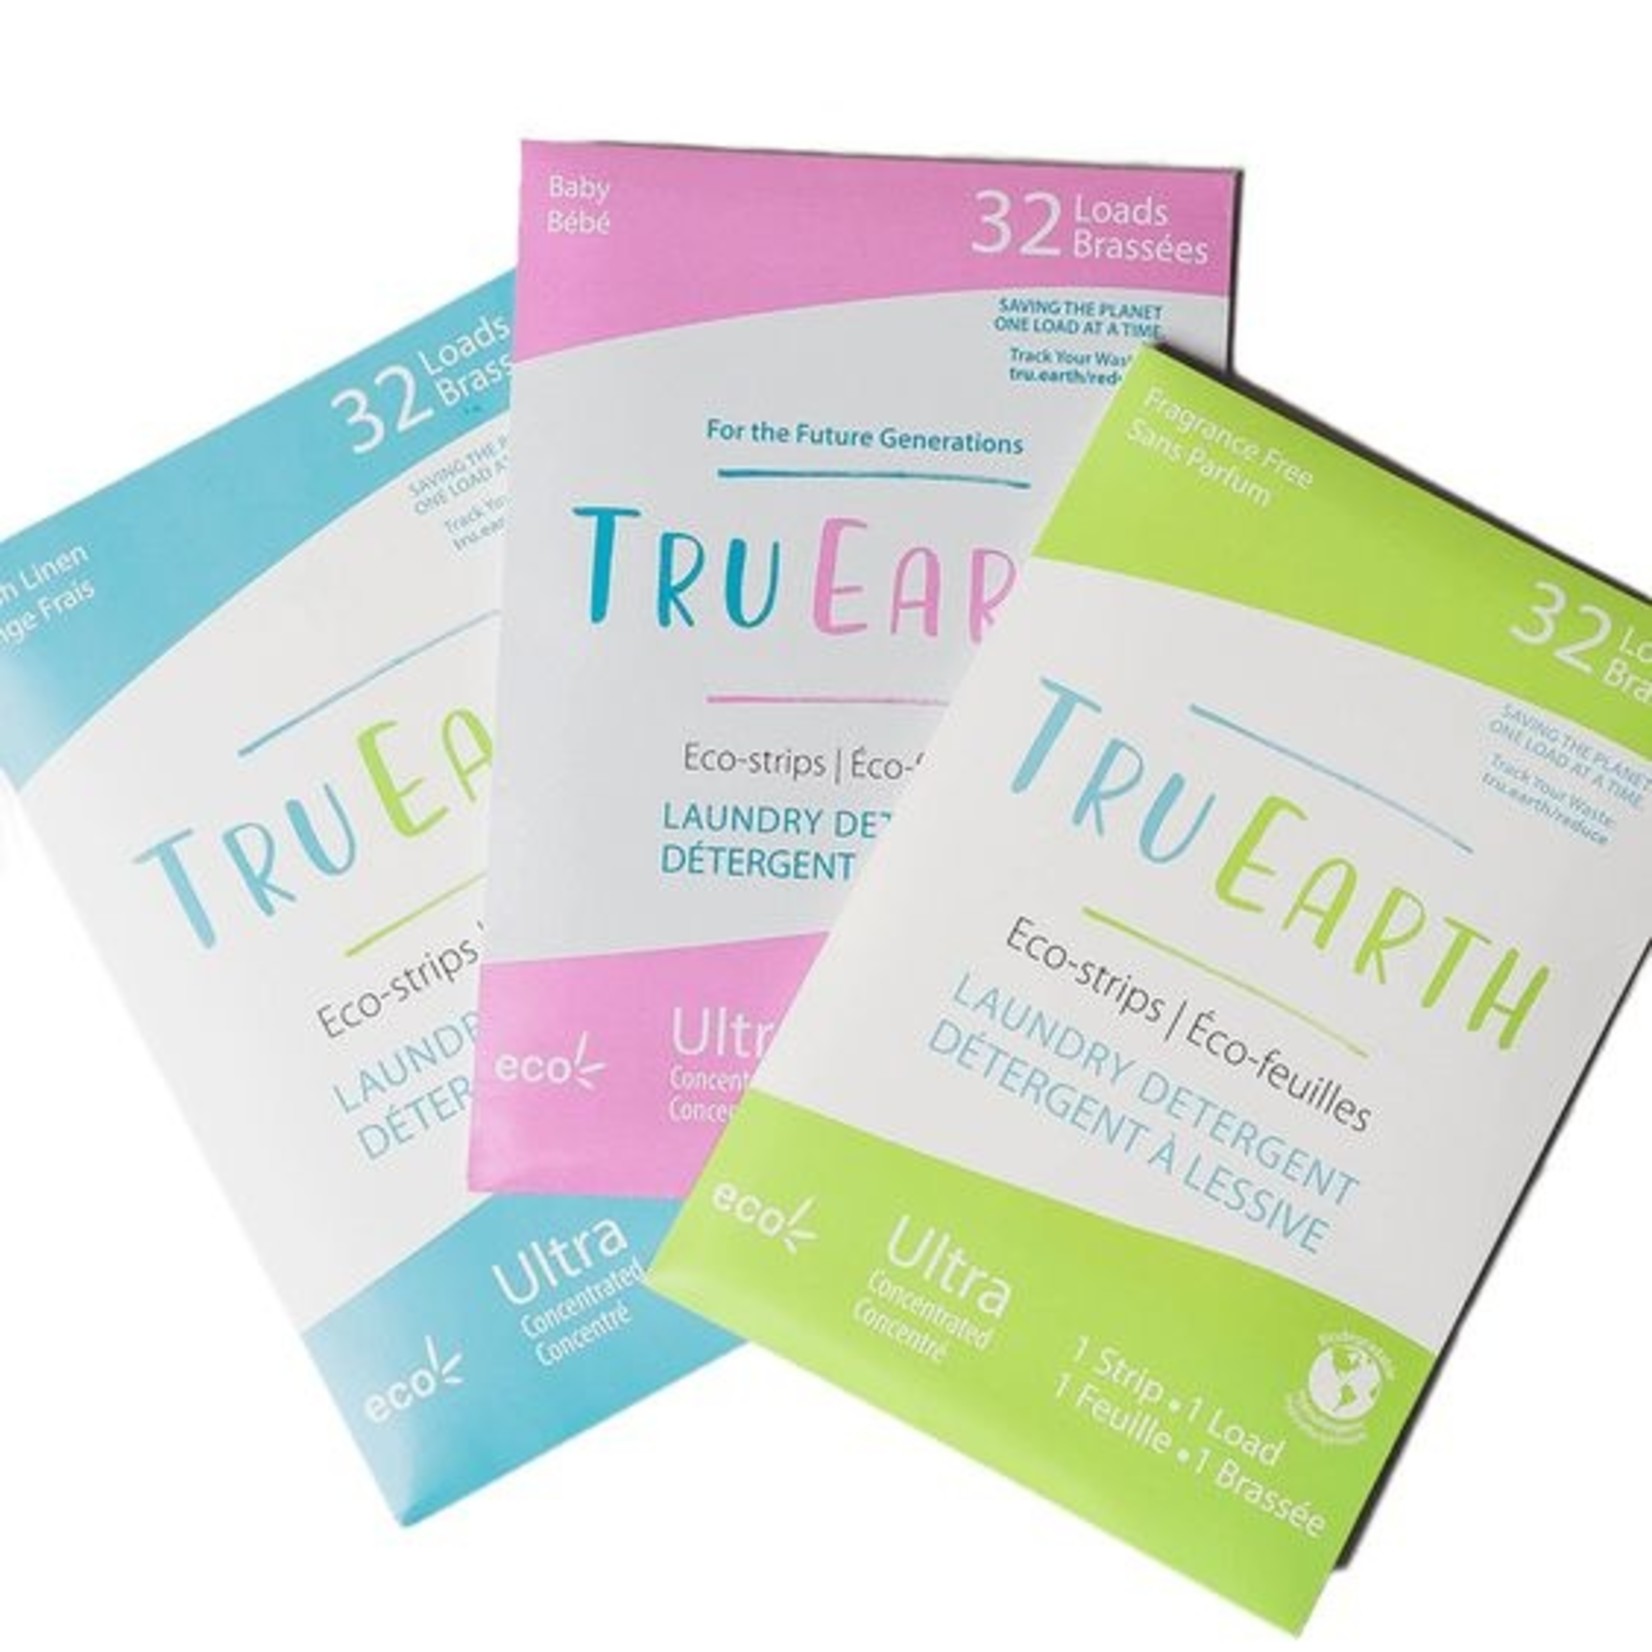 Tru Earth Eco- Strips Laundry Detergent